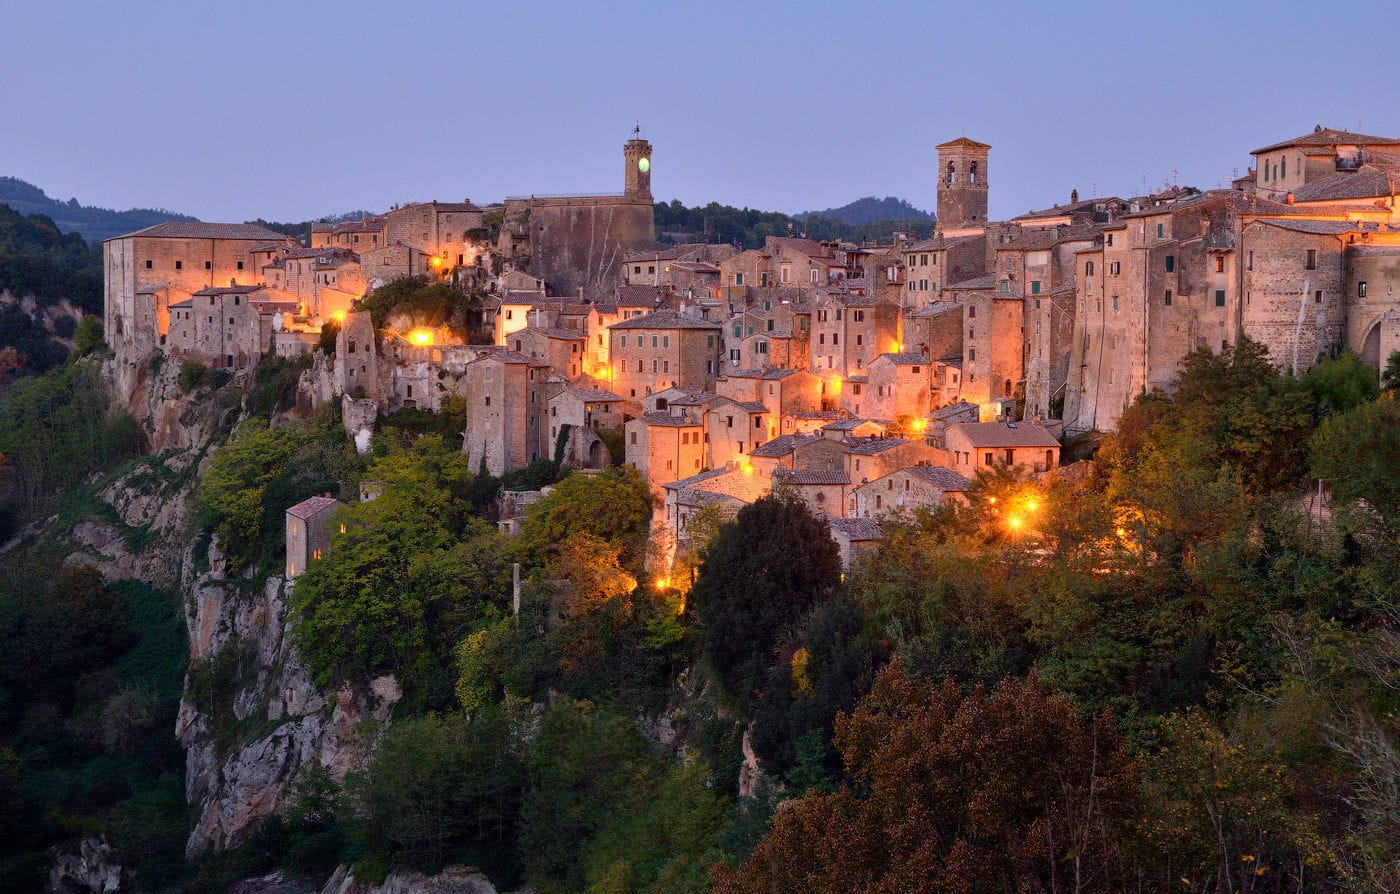 The ancient hill town of Sorano in southern Tuscany